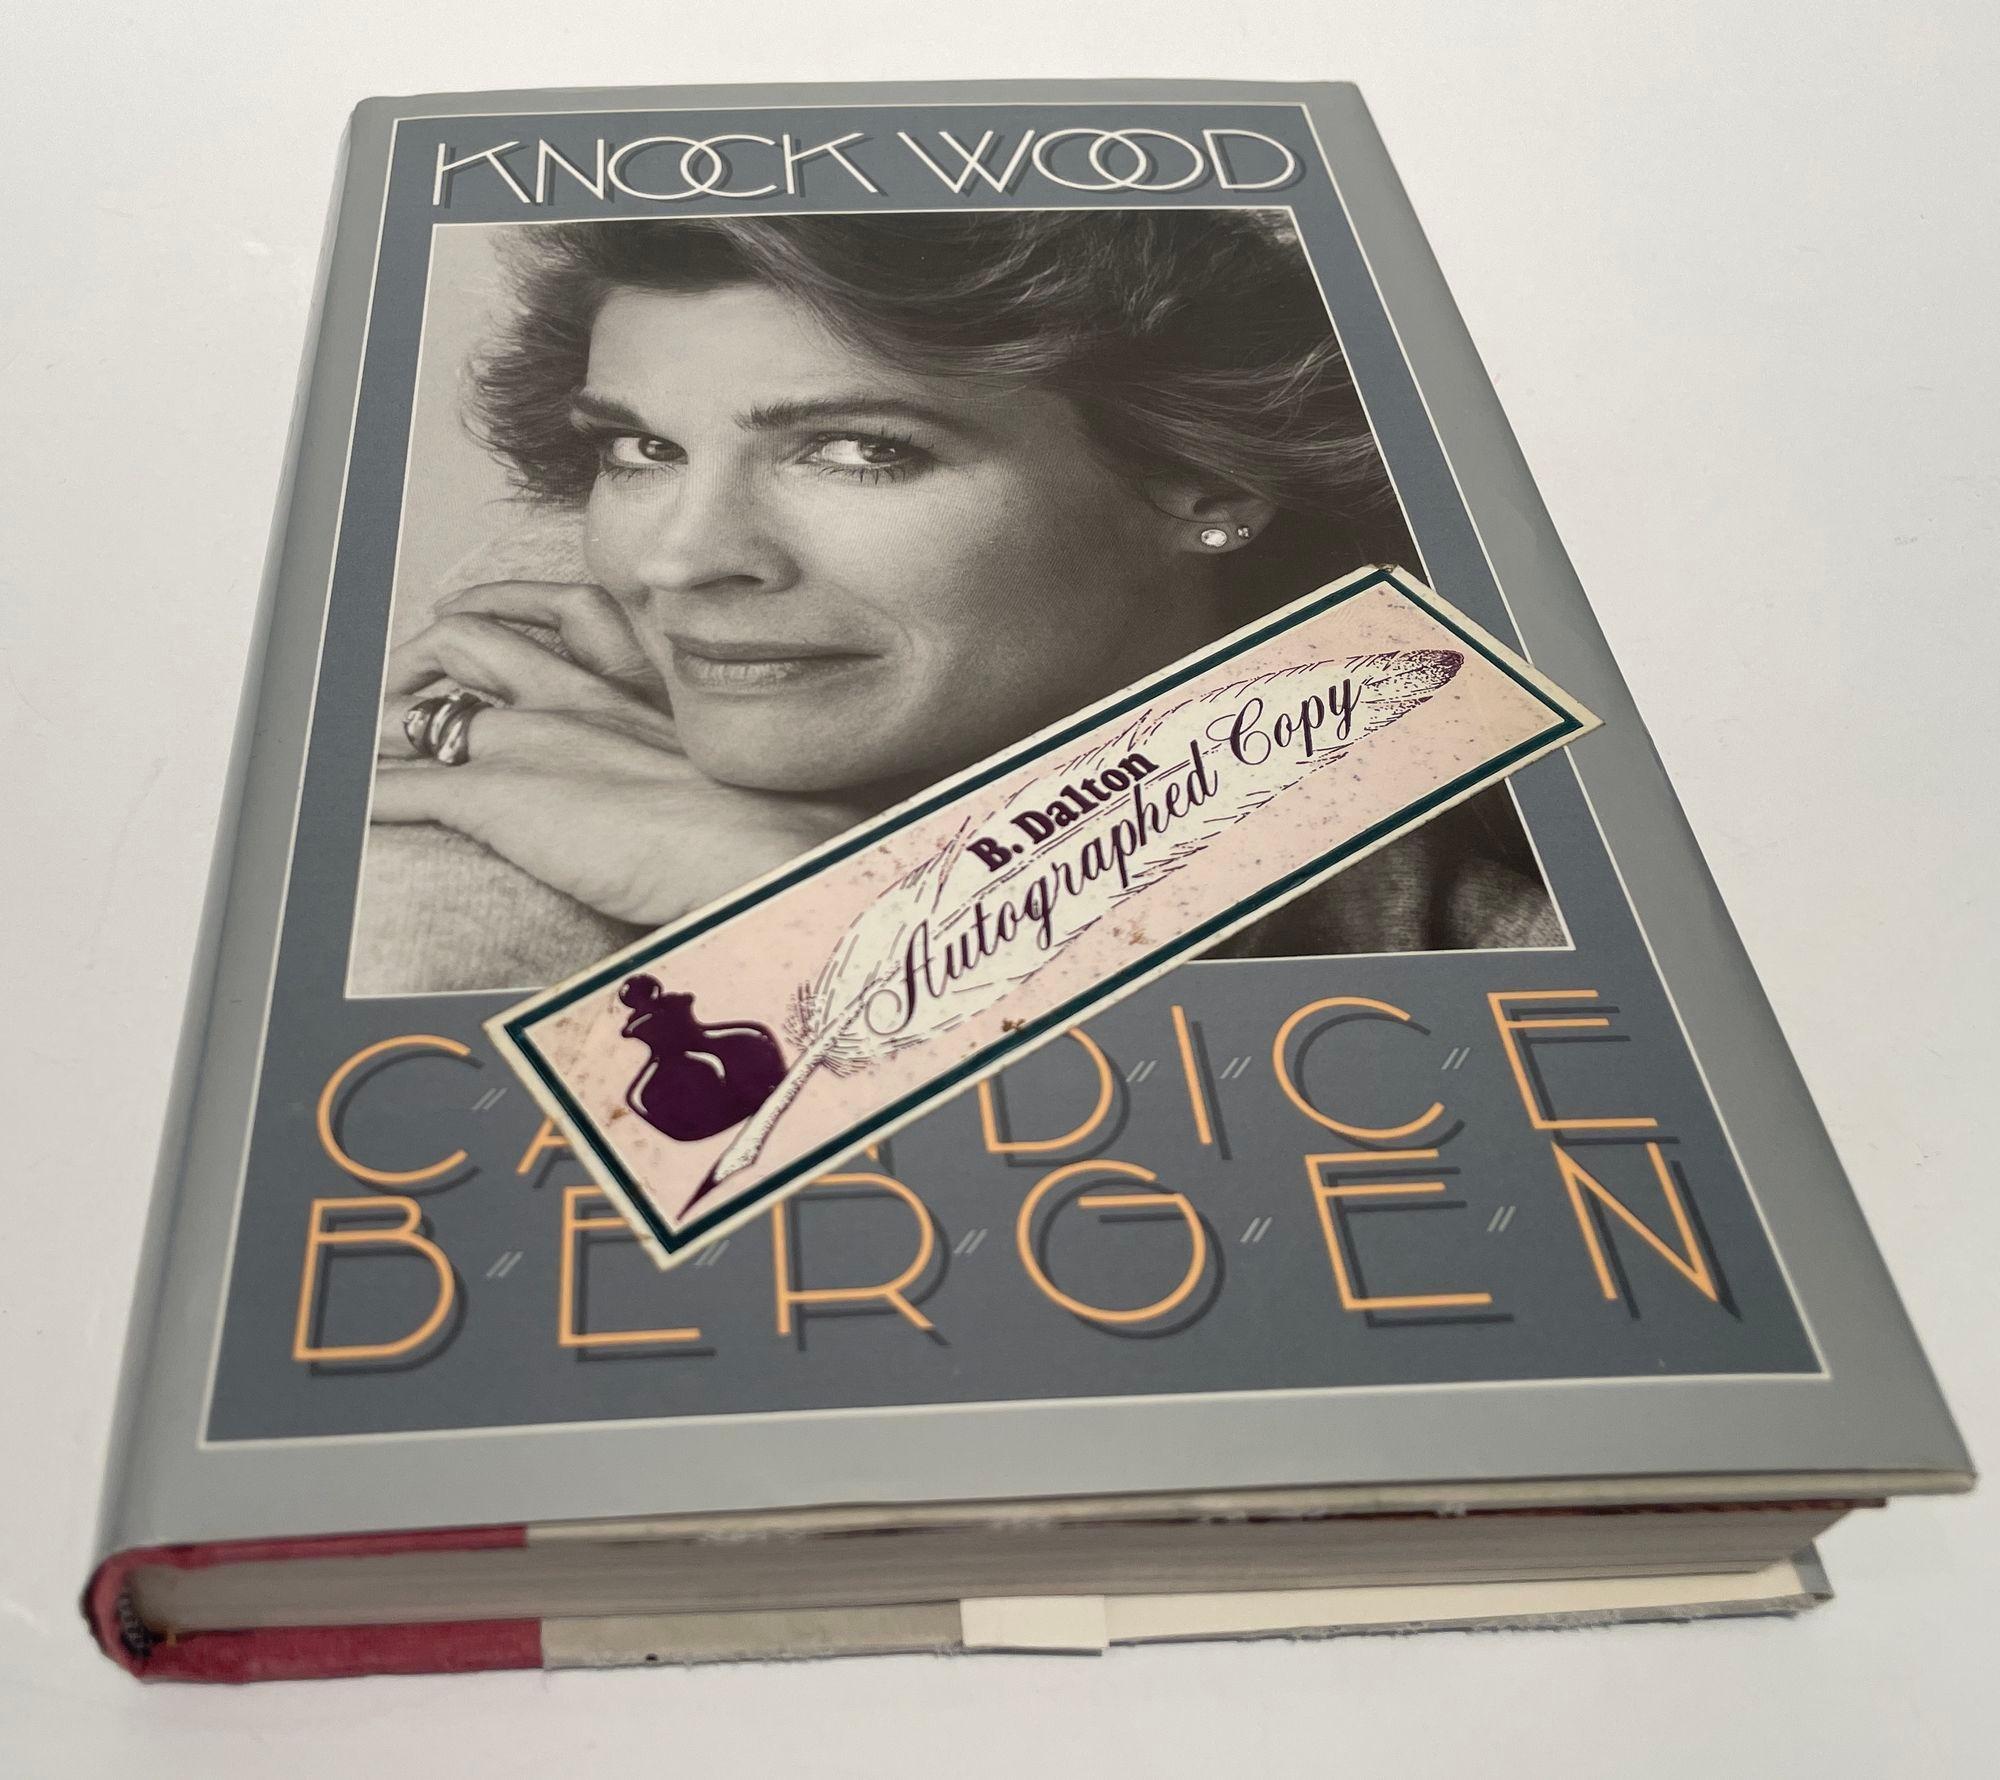 Knock Wood by Candice Bergen signed and autographed book.
Candice Bergen KNOCK WOOD 1984 First Edition 1st Printing Autobiography.
Candice Bergen’s best selling 1984 memoir: an “engaging, intelligent, and wittily self-deprecating autobiography” (The